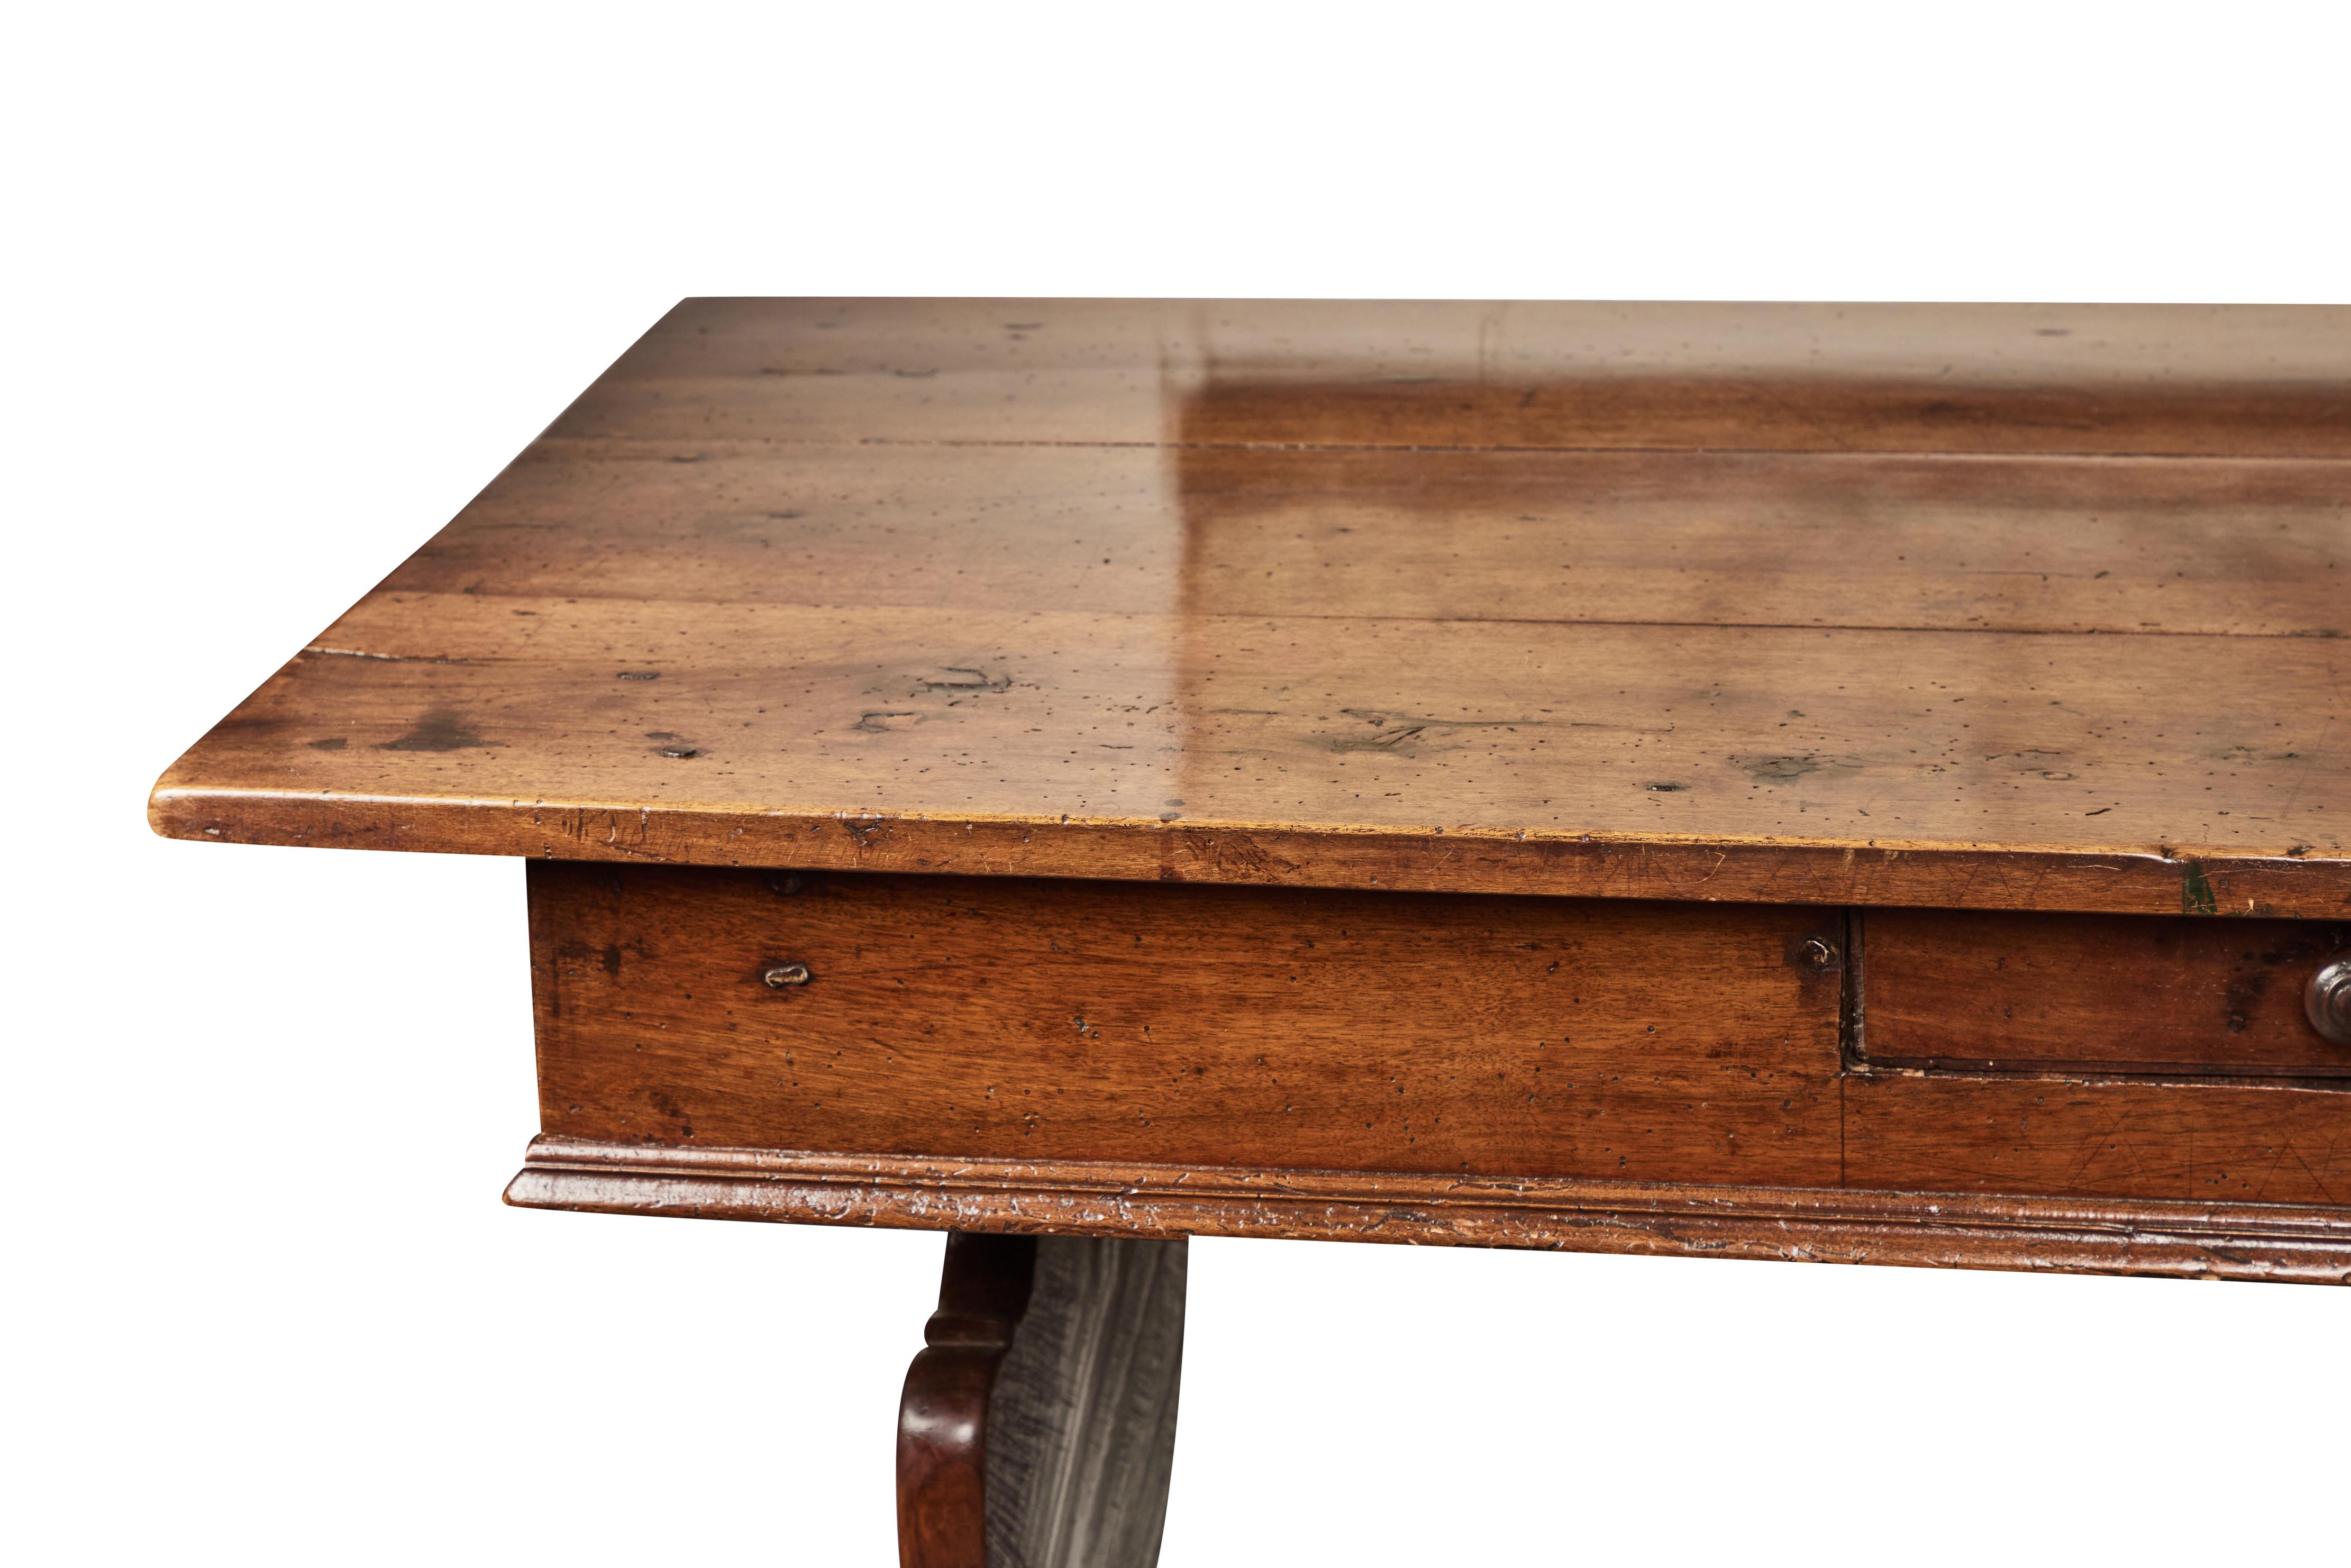 Double sided, 3 plank top, walnut library table with 2 drawers on each side. Urn shaped legs connect the stretcher. Beautiful patina on wood.